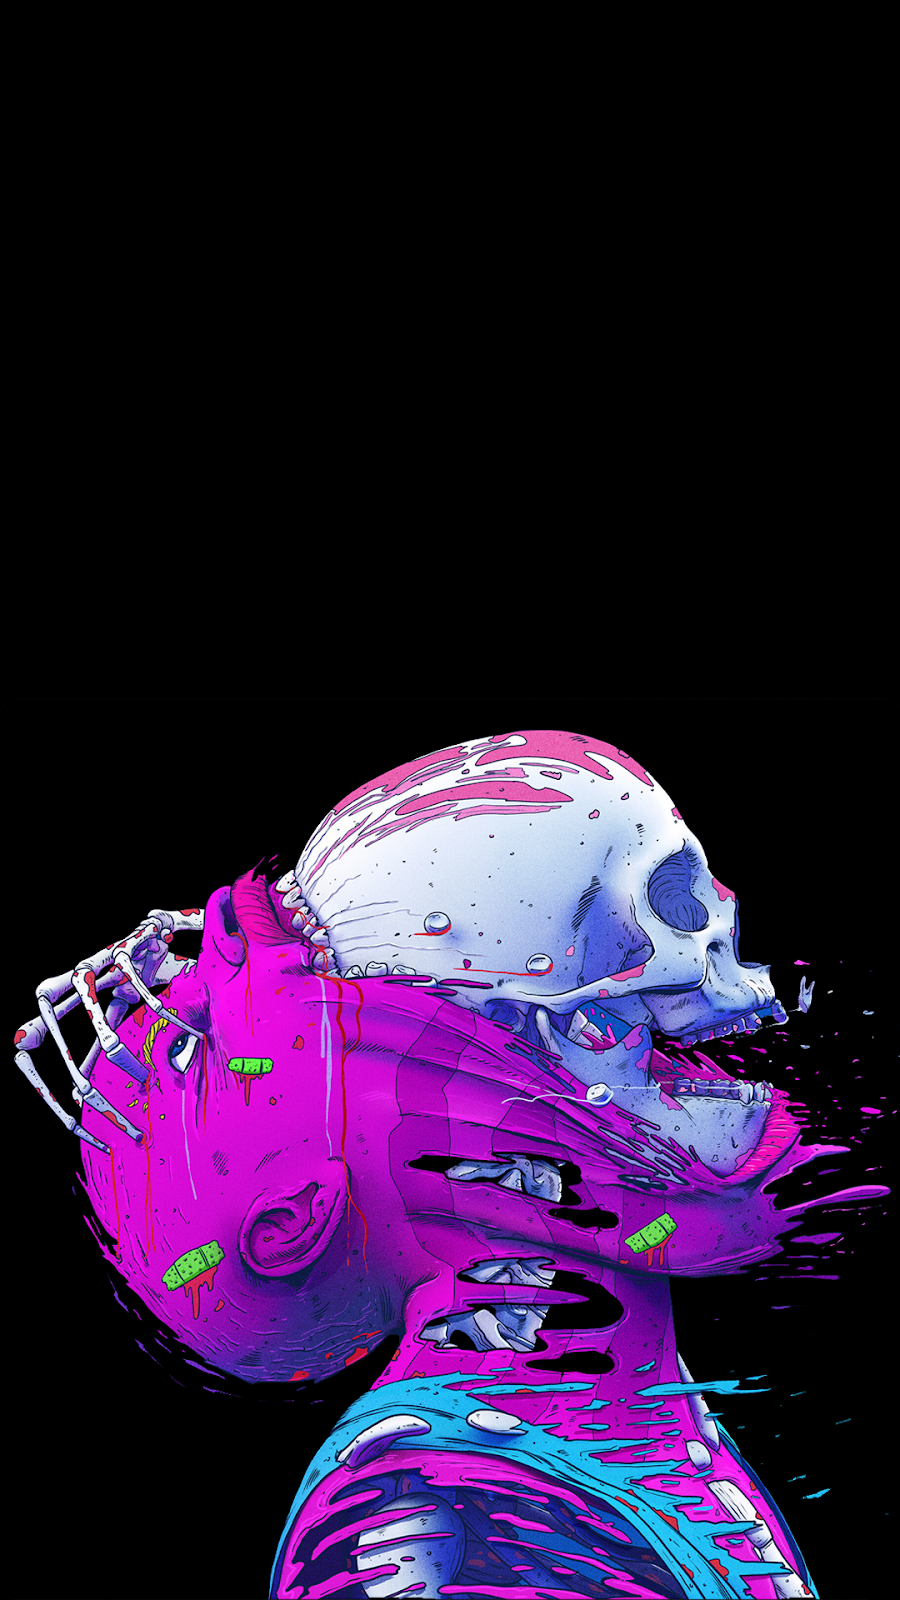 AMOLED PHONE WALLPAPER COLLECTION 122. Cool Wallpaper.cc. Skull wallpaper, Pop art wallpaper, Black phone wallpaper